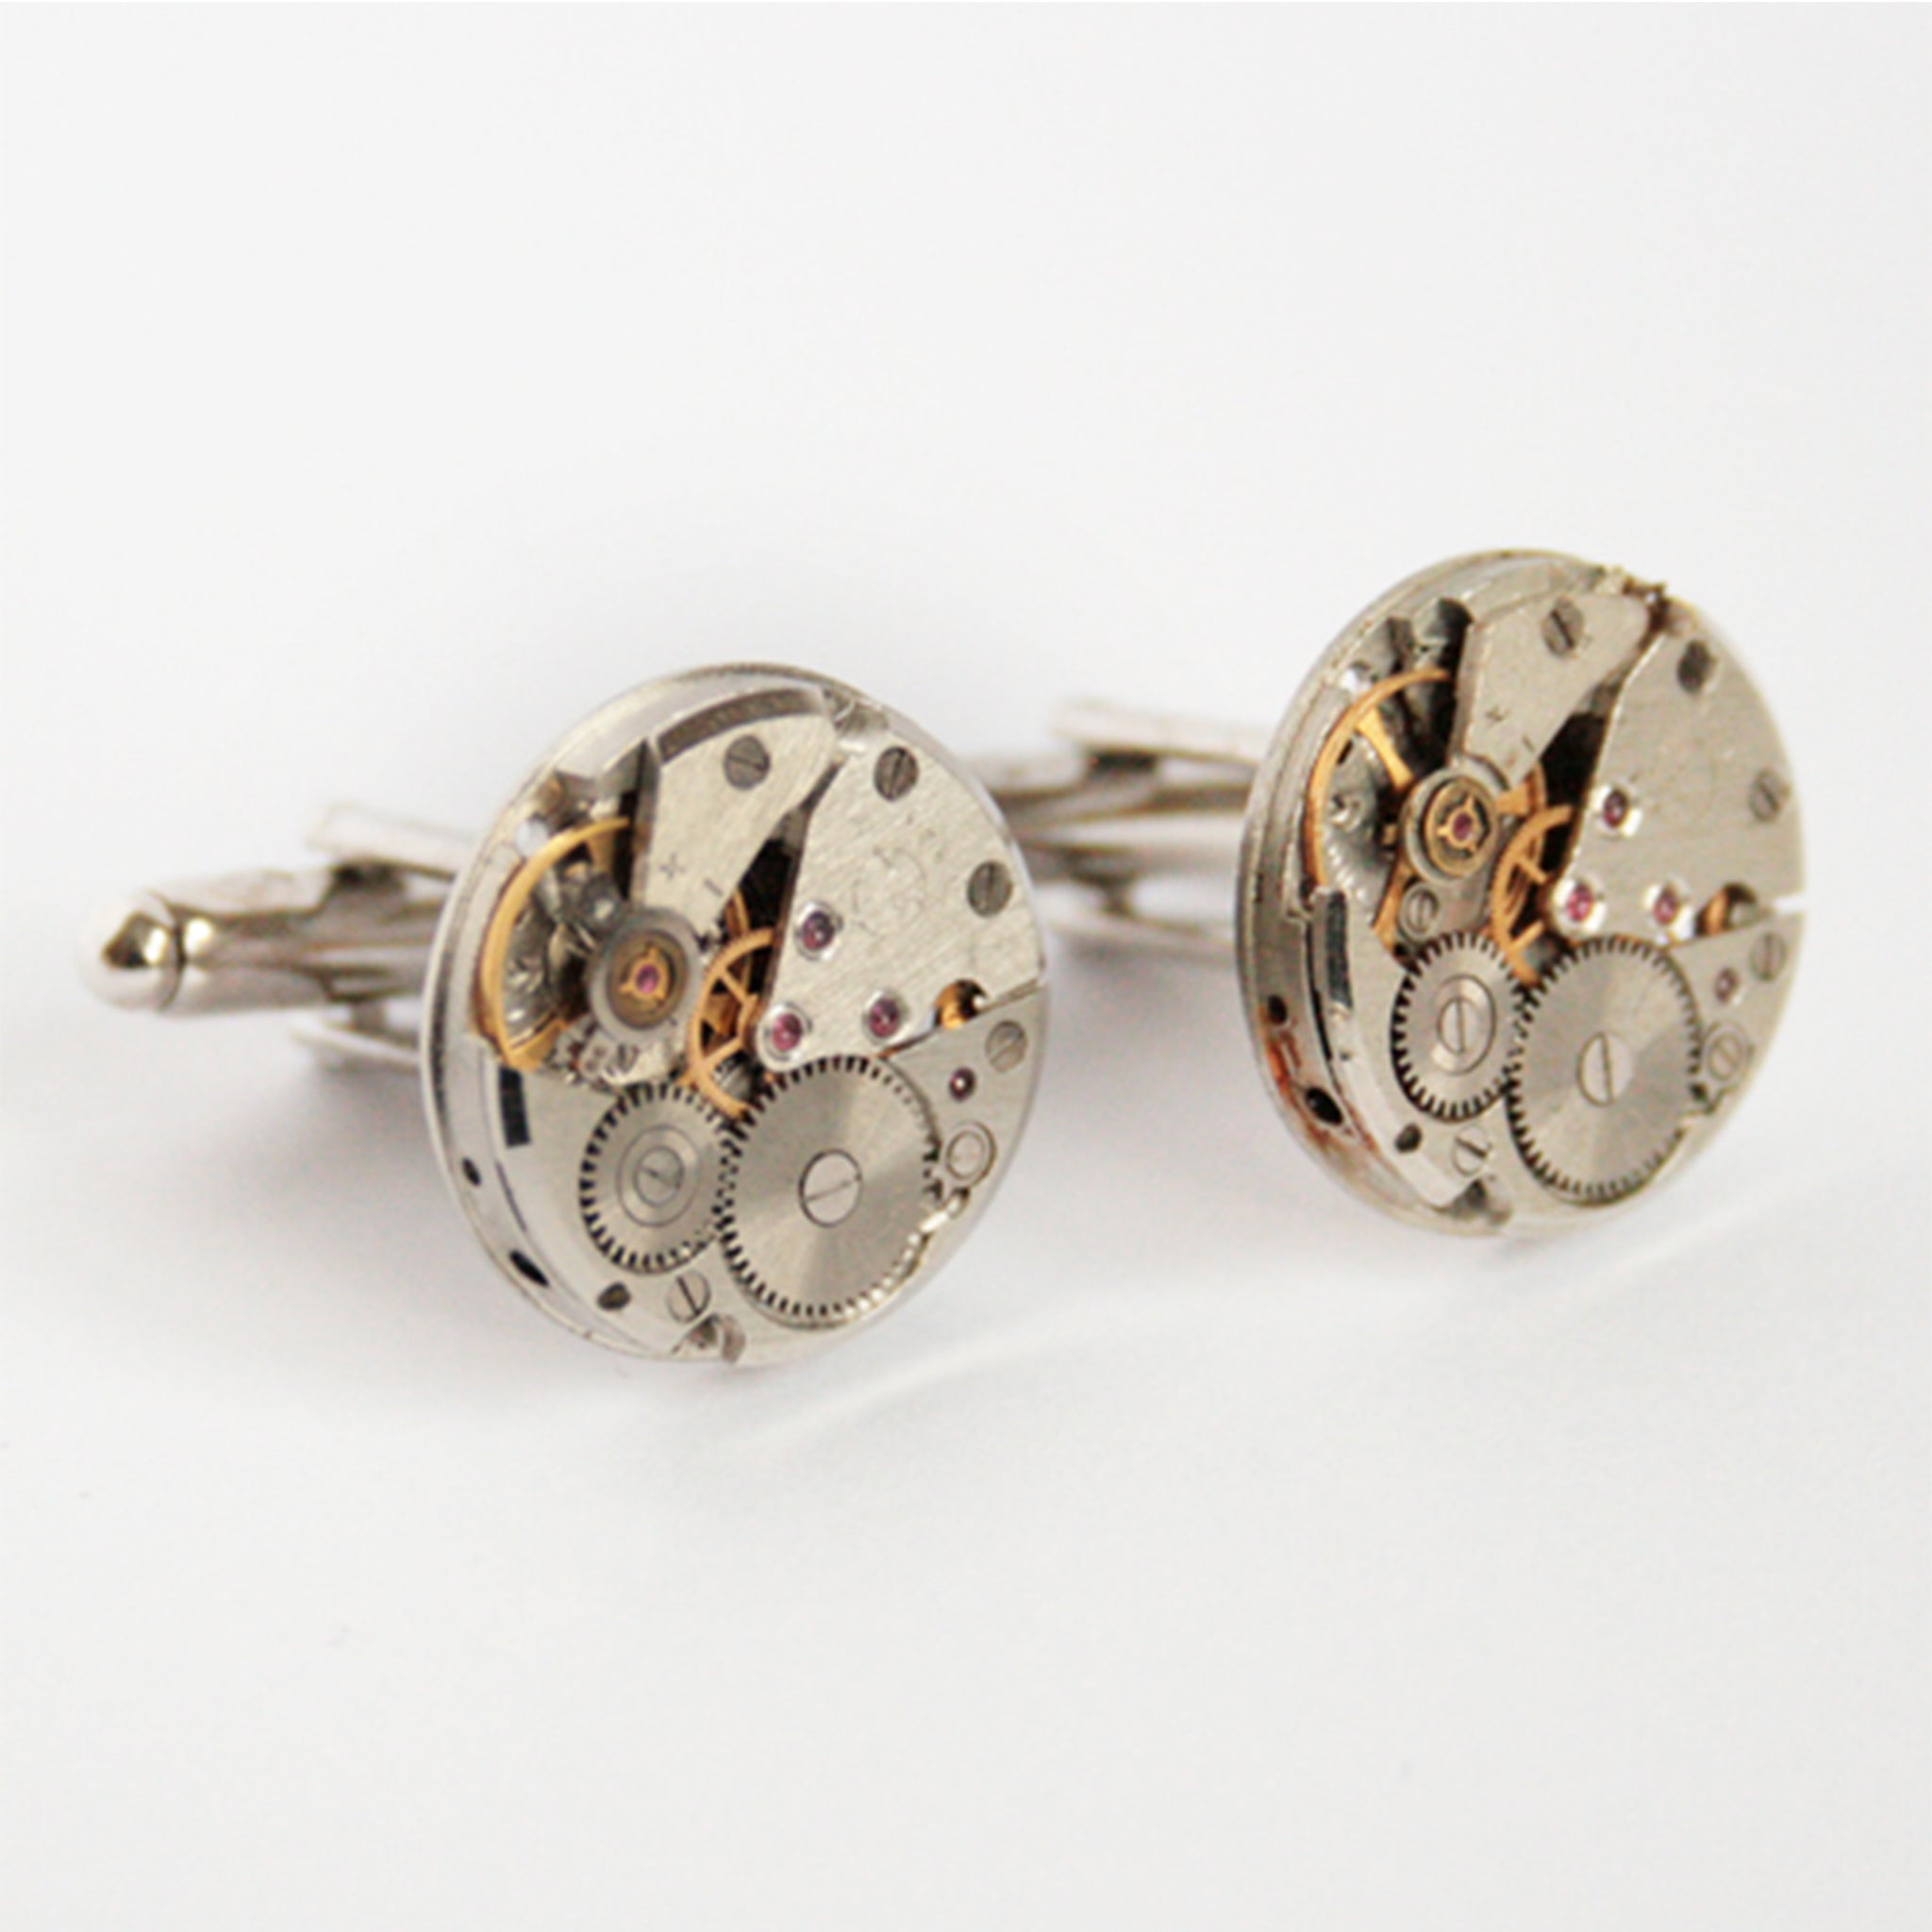 Steampunk Cufflinks for Men made of real watches